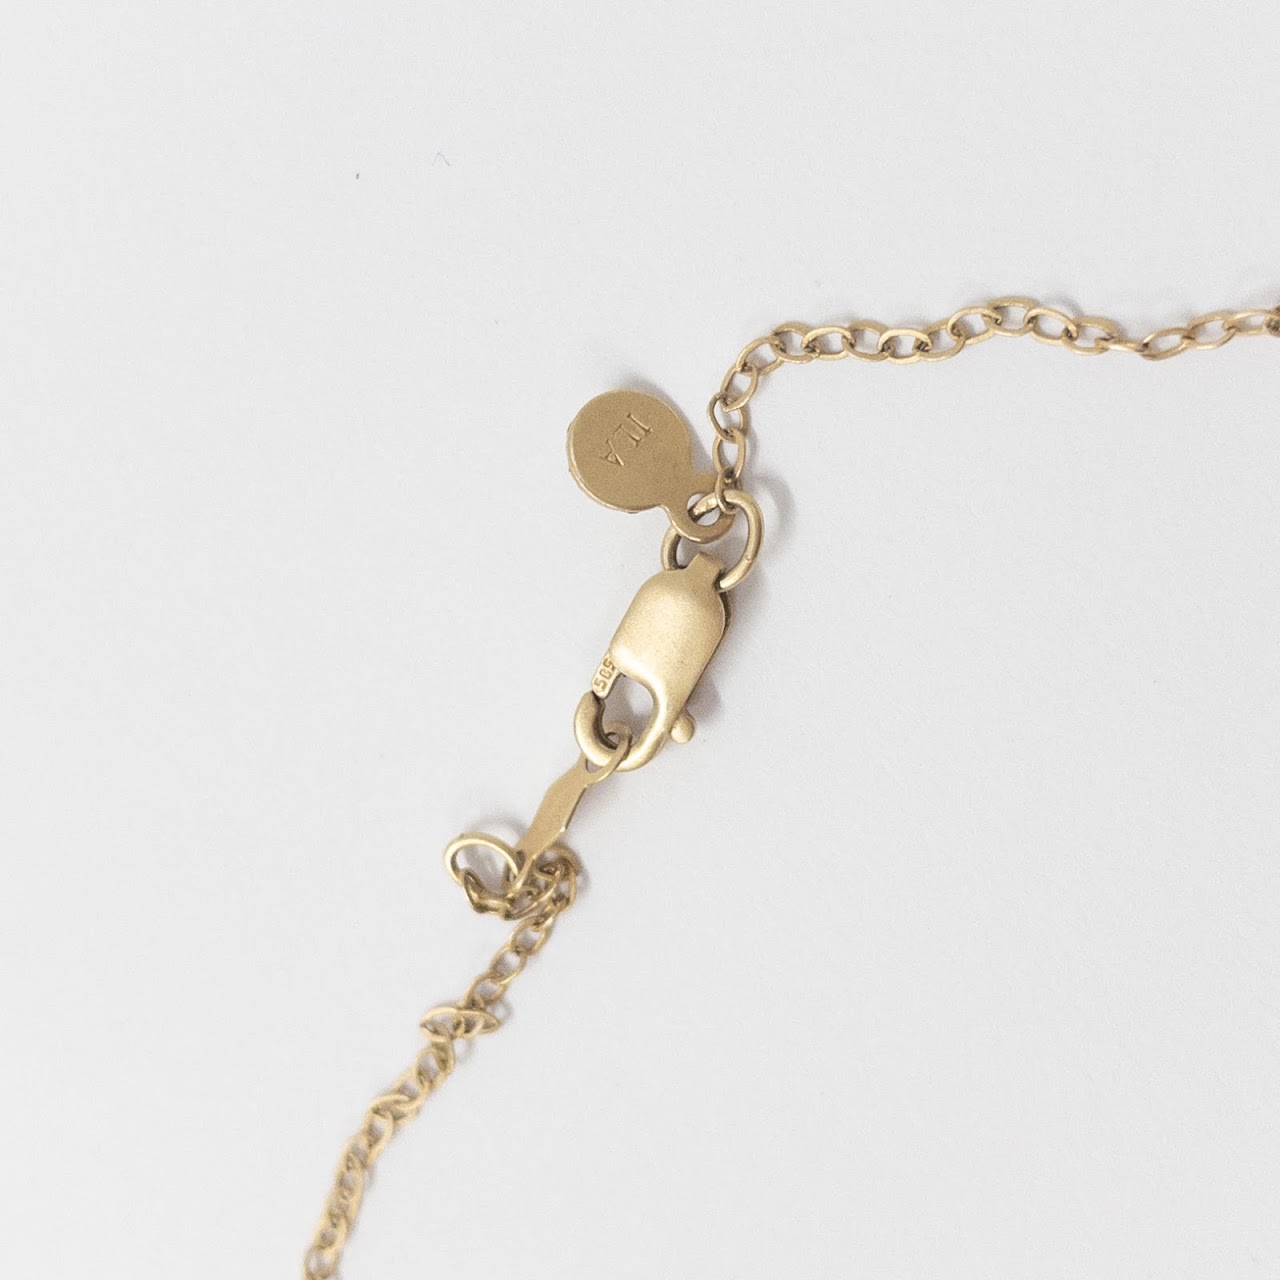 14K Gold Chain with Metal, Diamond & Clear Stone Locket Pendant